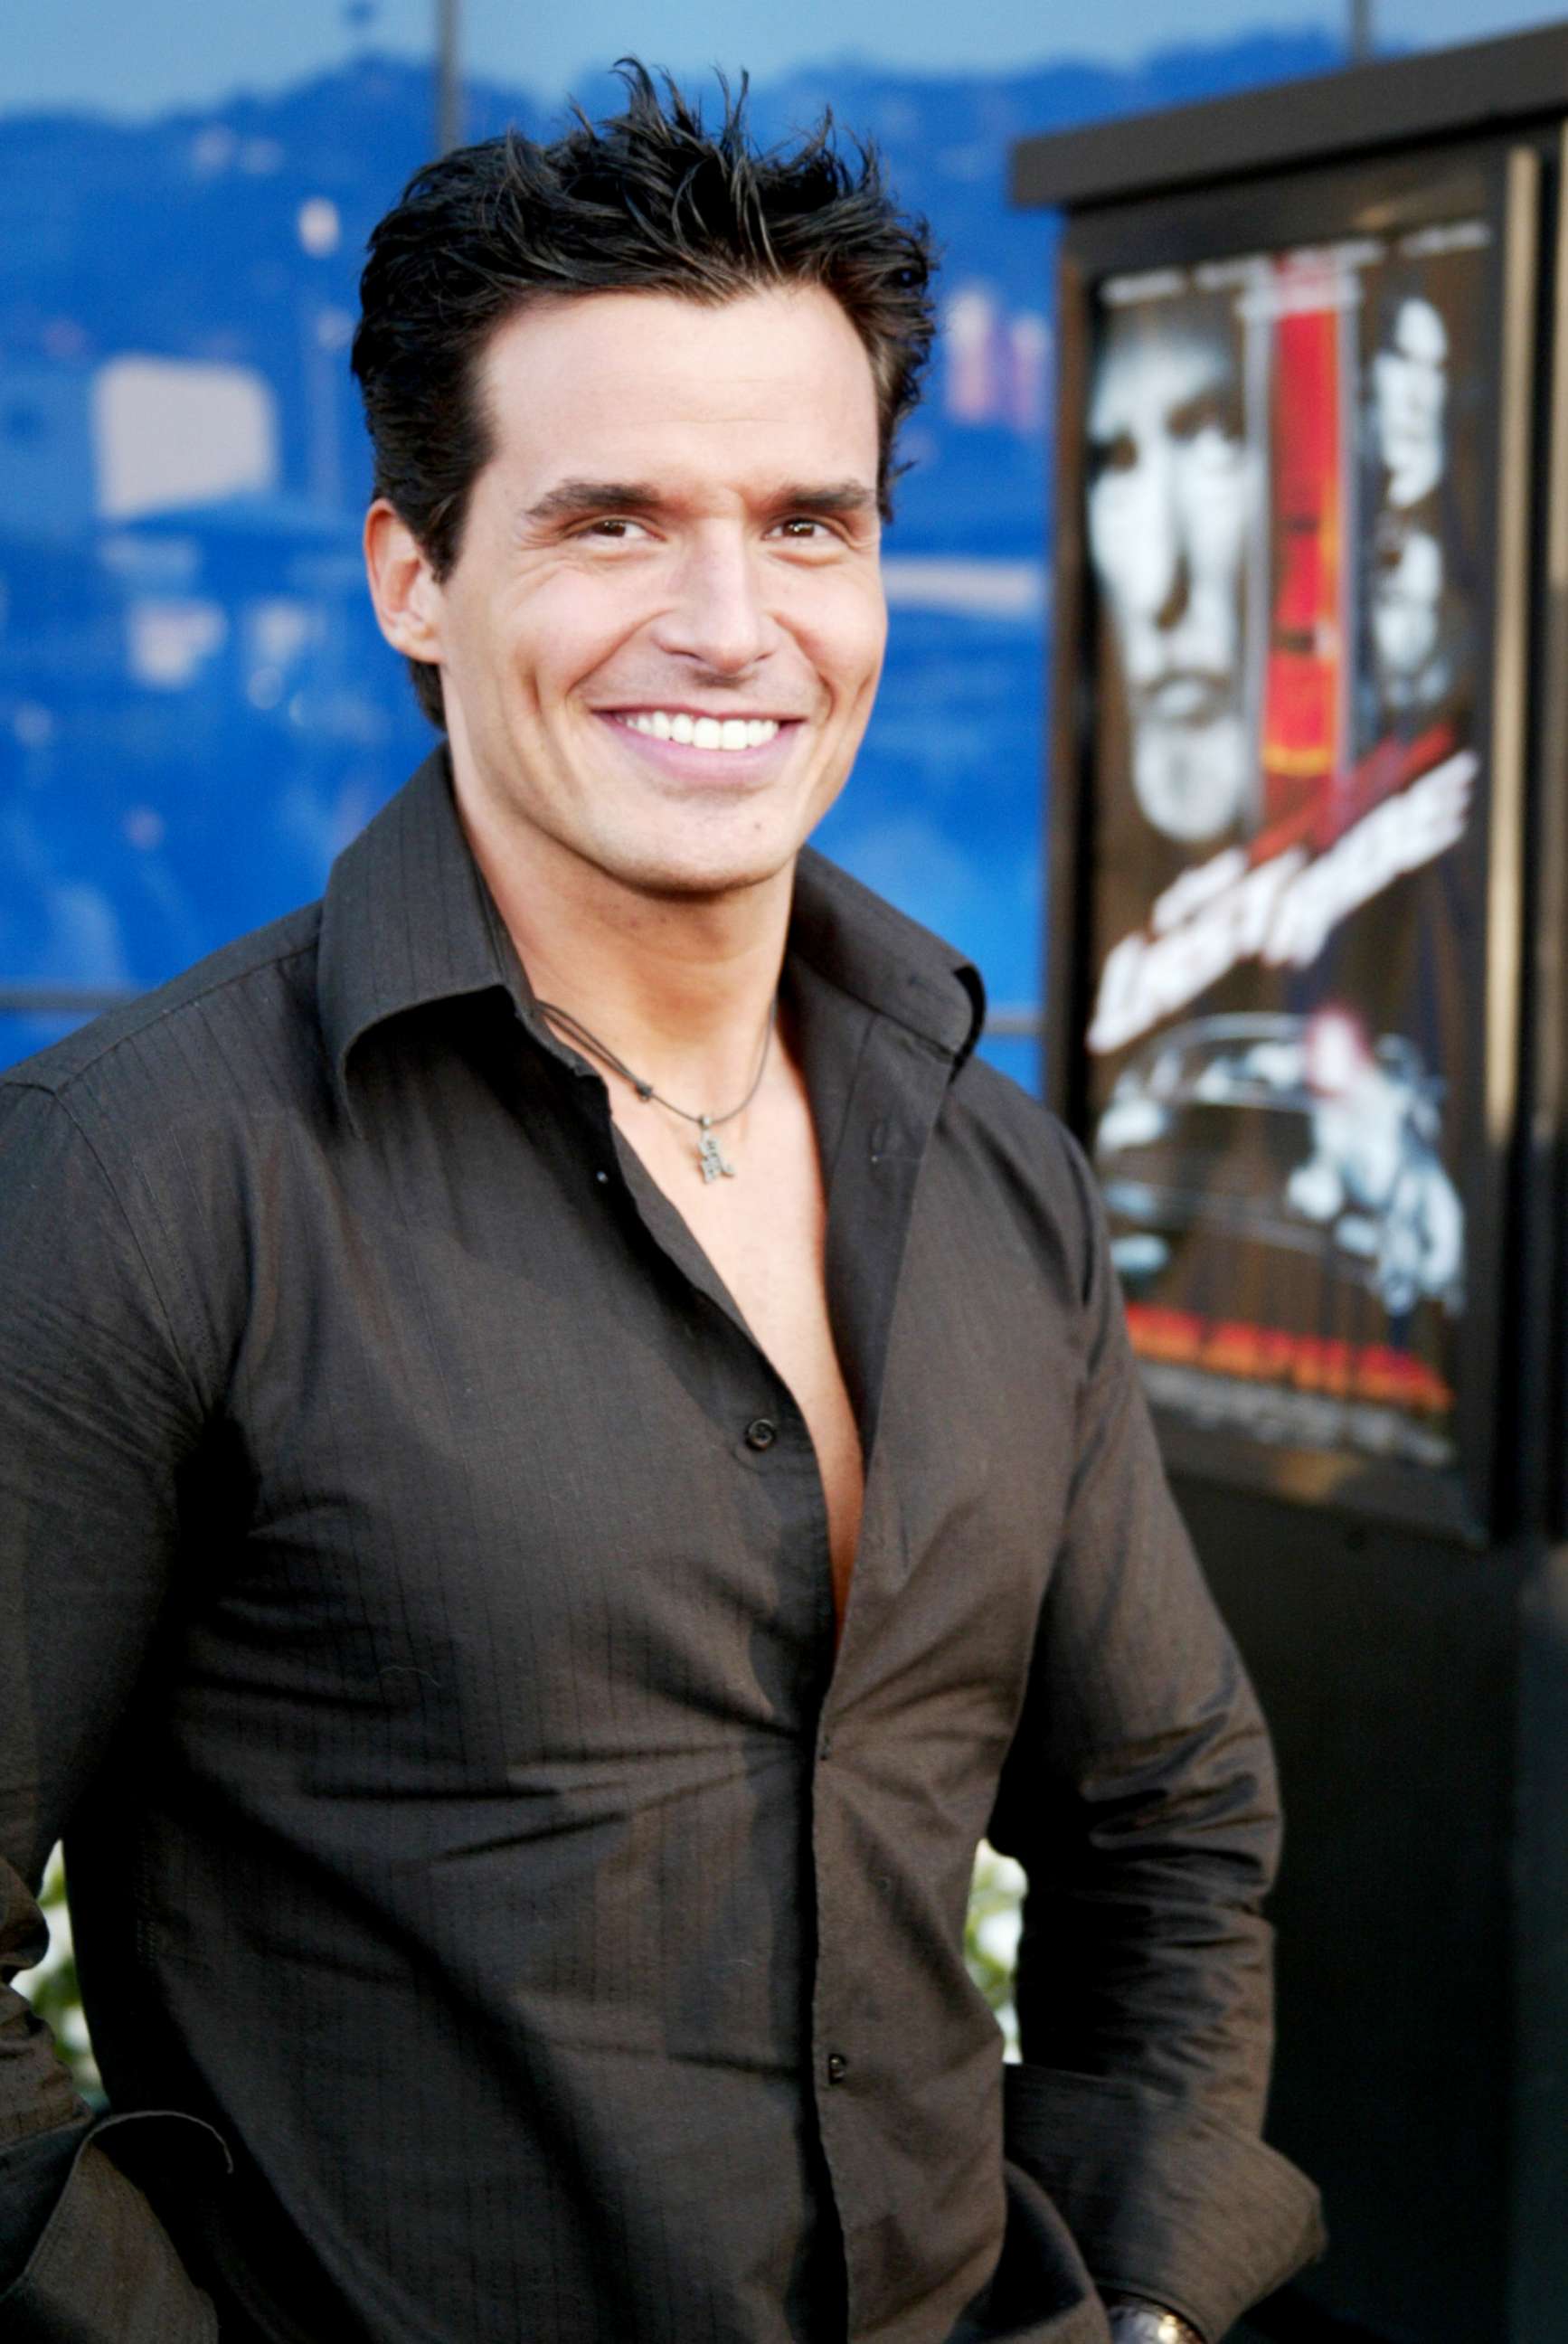 PHOTO: Antonio Sabato Jr. during "The Last Ride" World Premiere at Pacific Design Center in Hollywood, Calif. in this May 26, 2004 file photo.